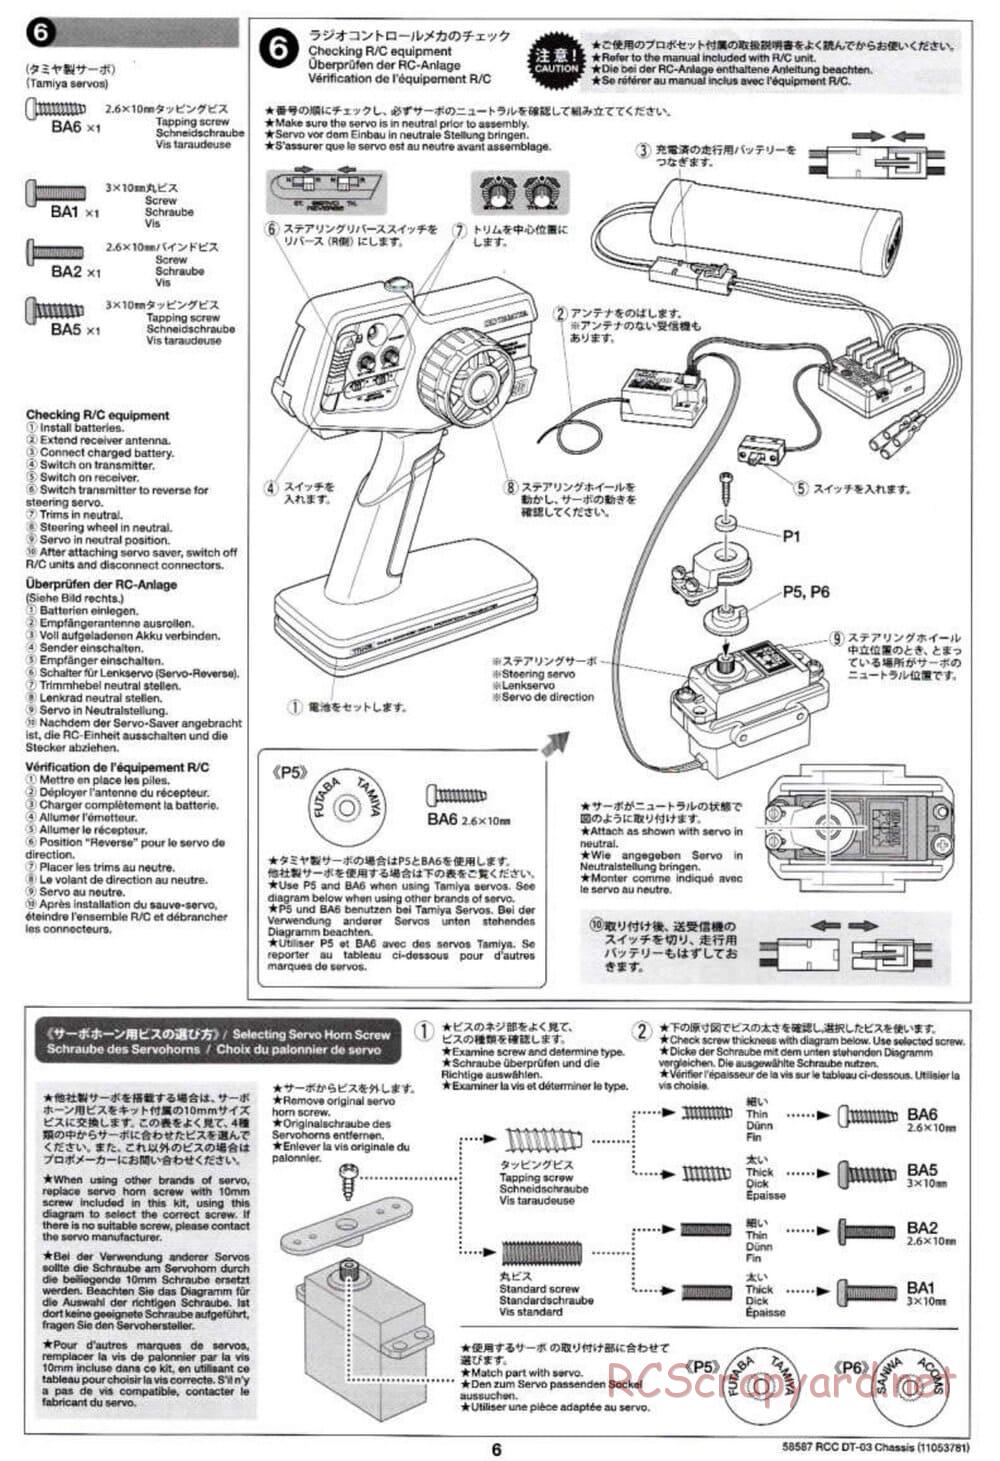 Tamiya - Neo Fighter Buggy Chassis - Manual - Page 6